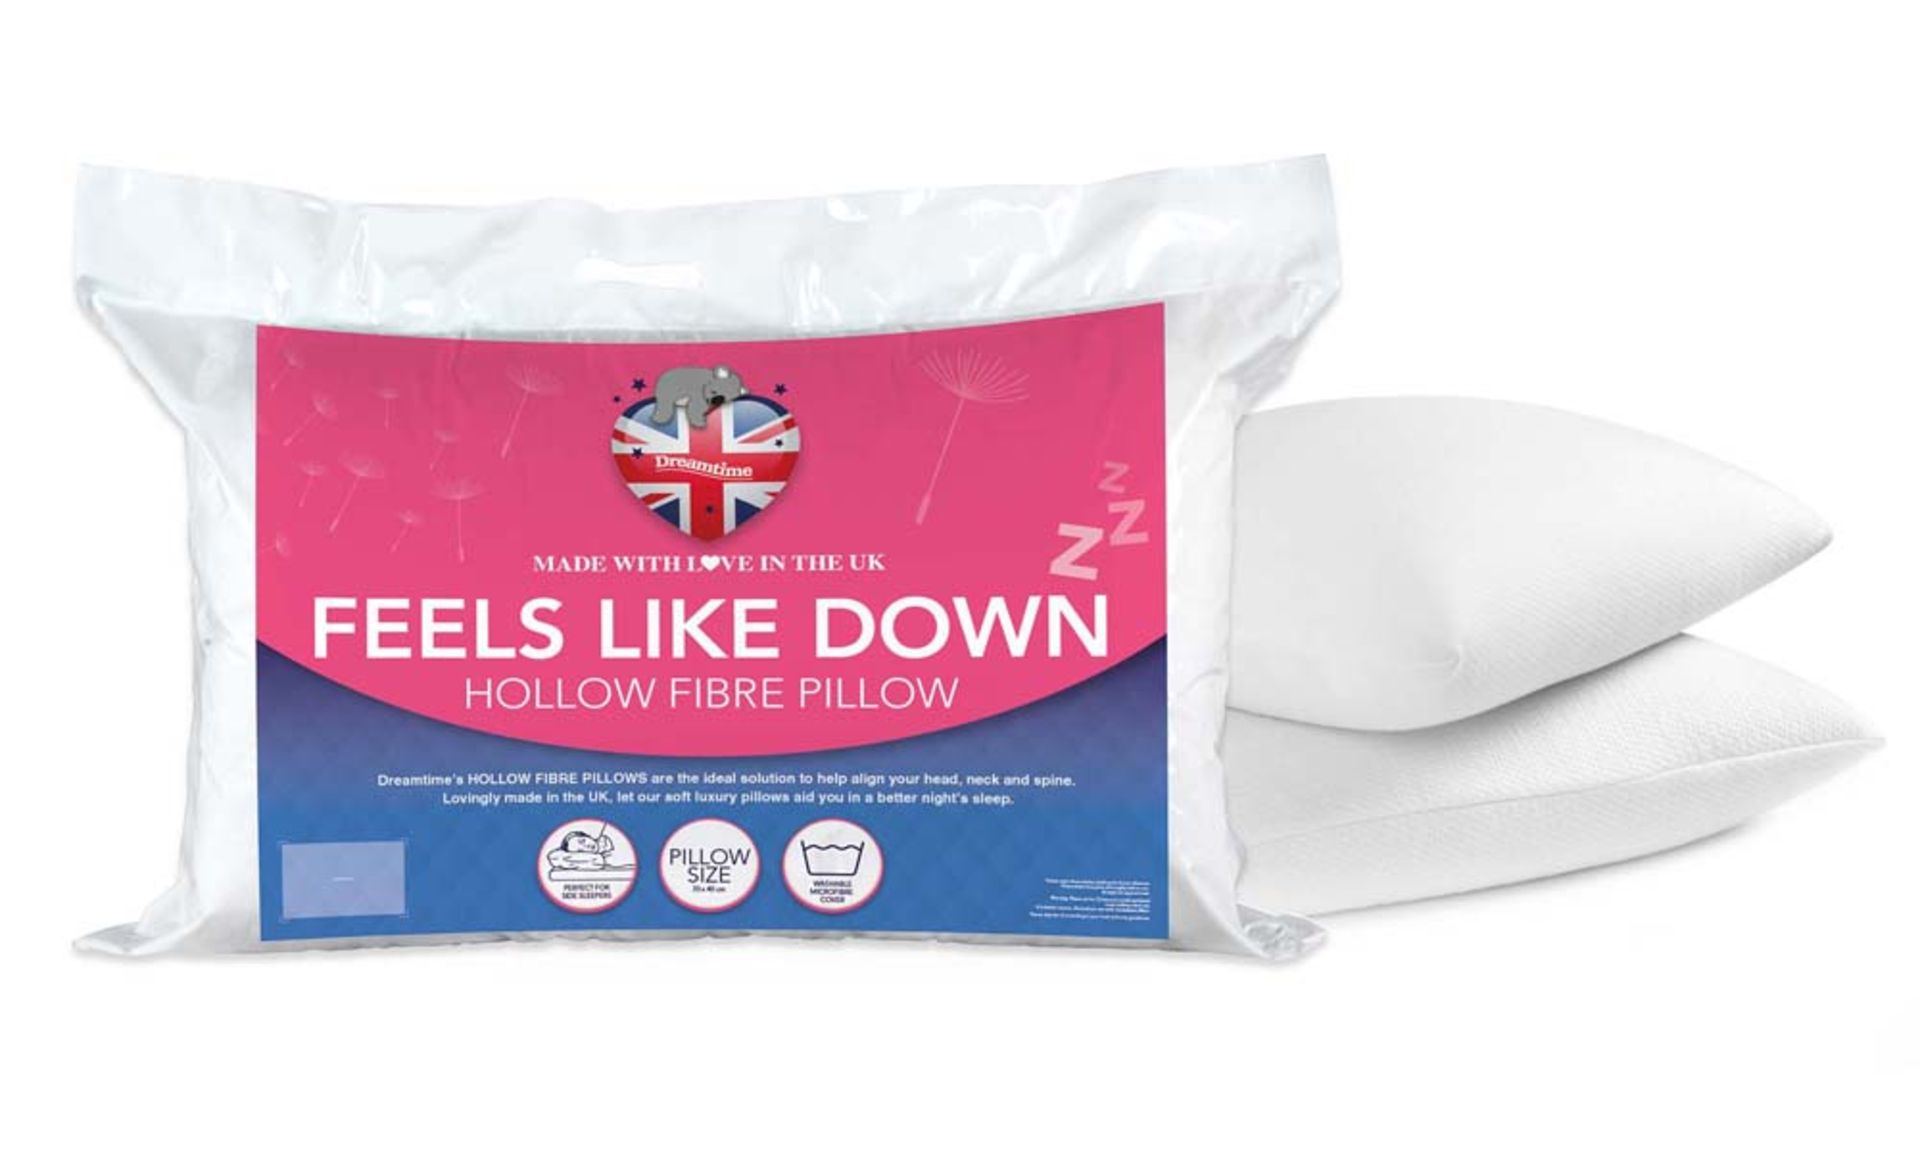 V Brand New Twin Pack Luxury Pillows With Down-Like Filling & Super-Soft Cover. Machine Washable - Image 2 of 3